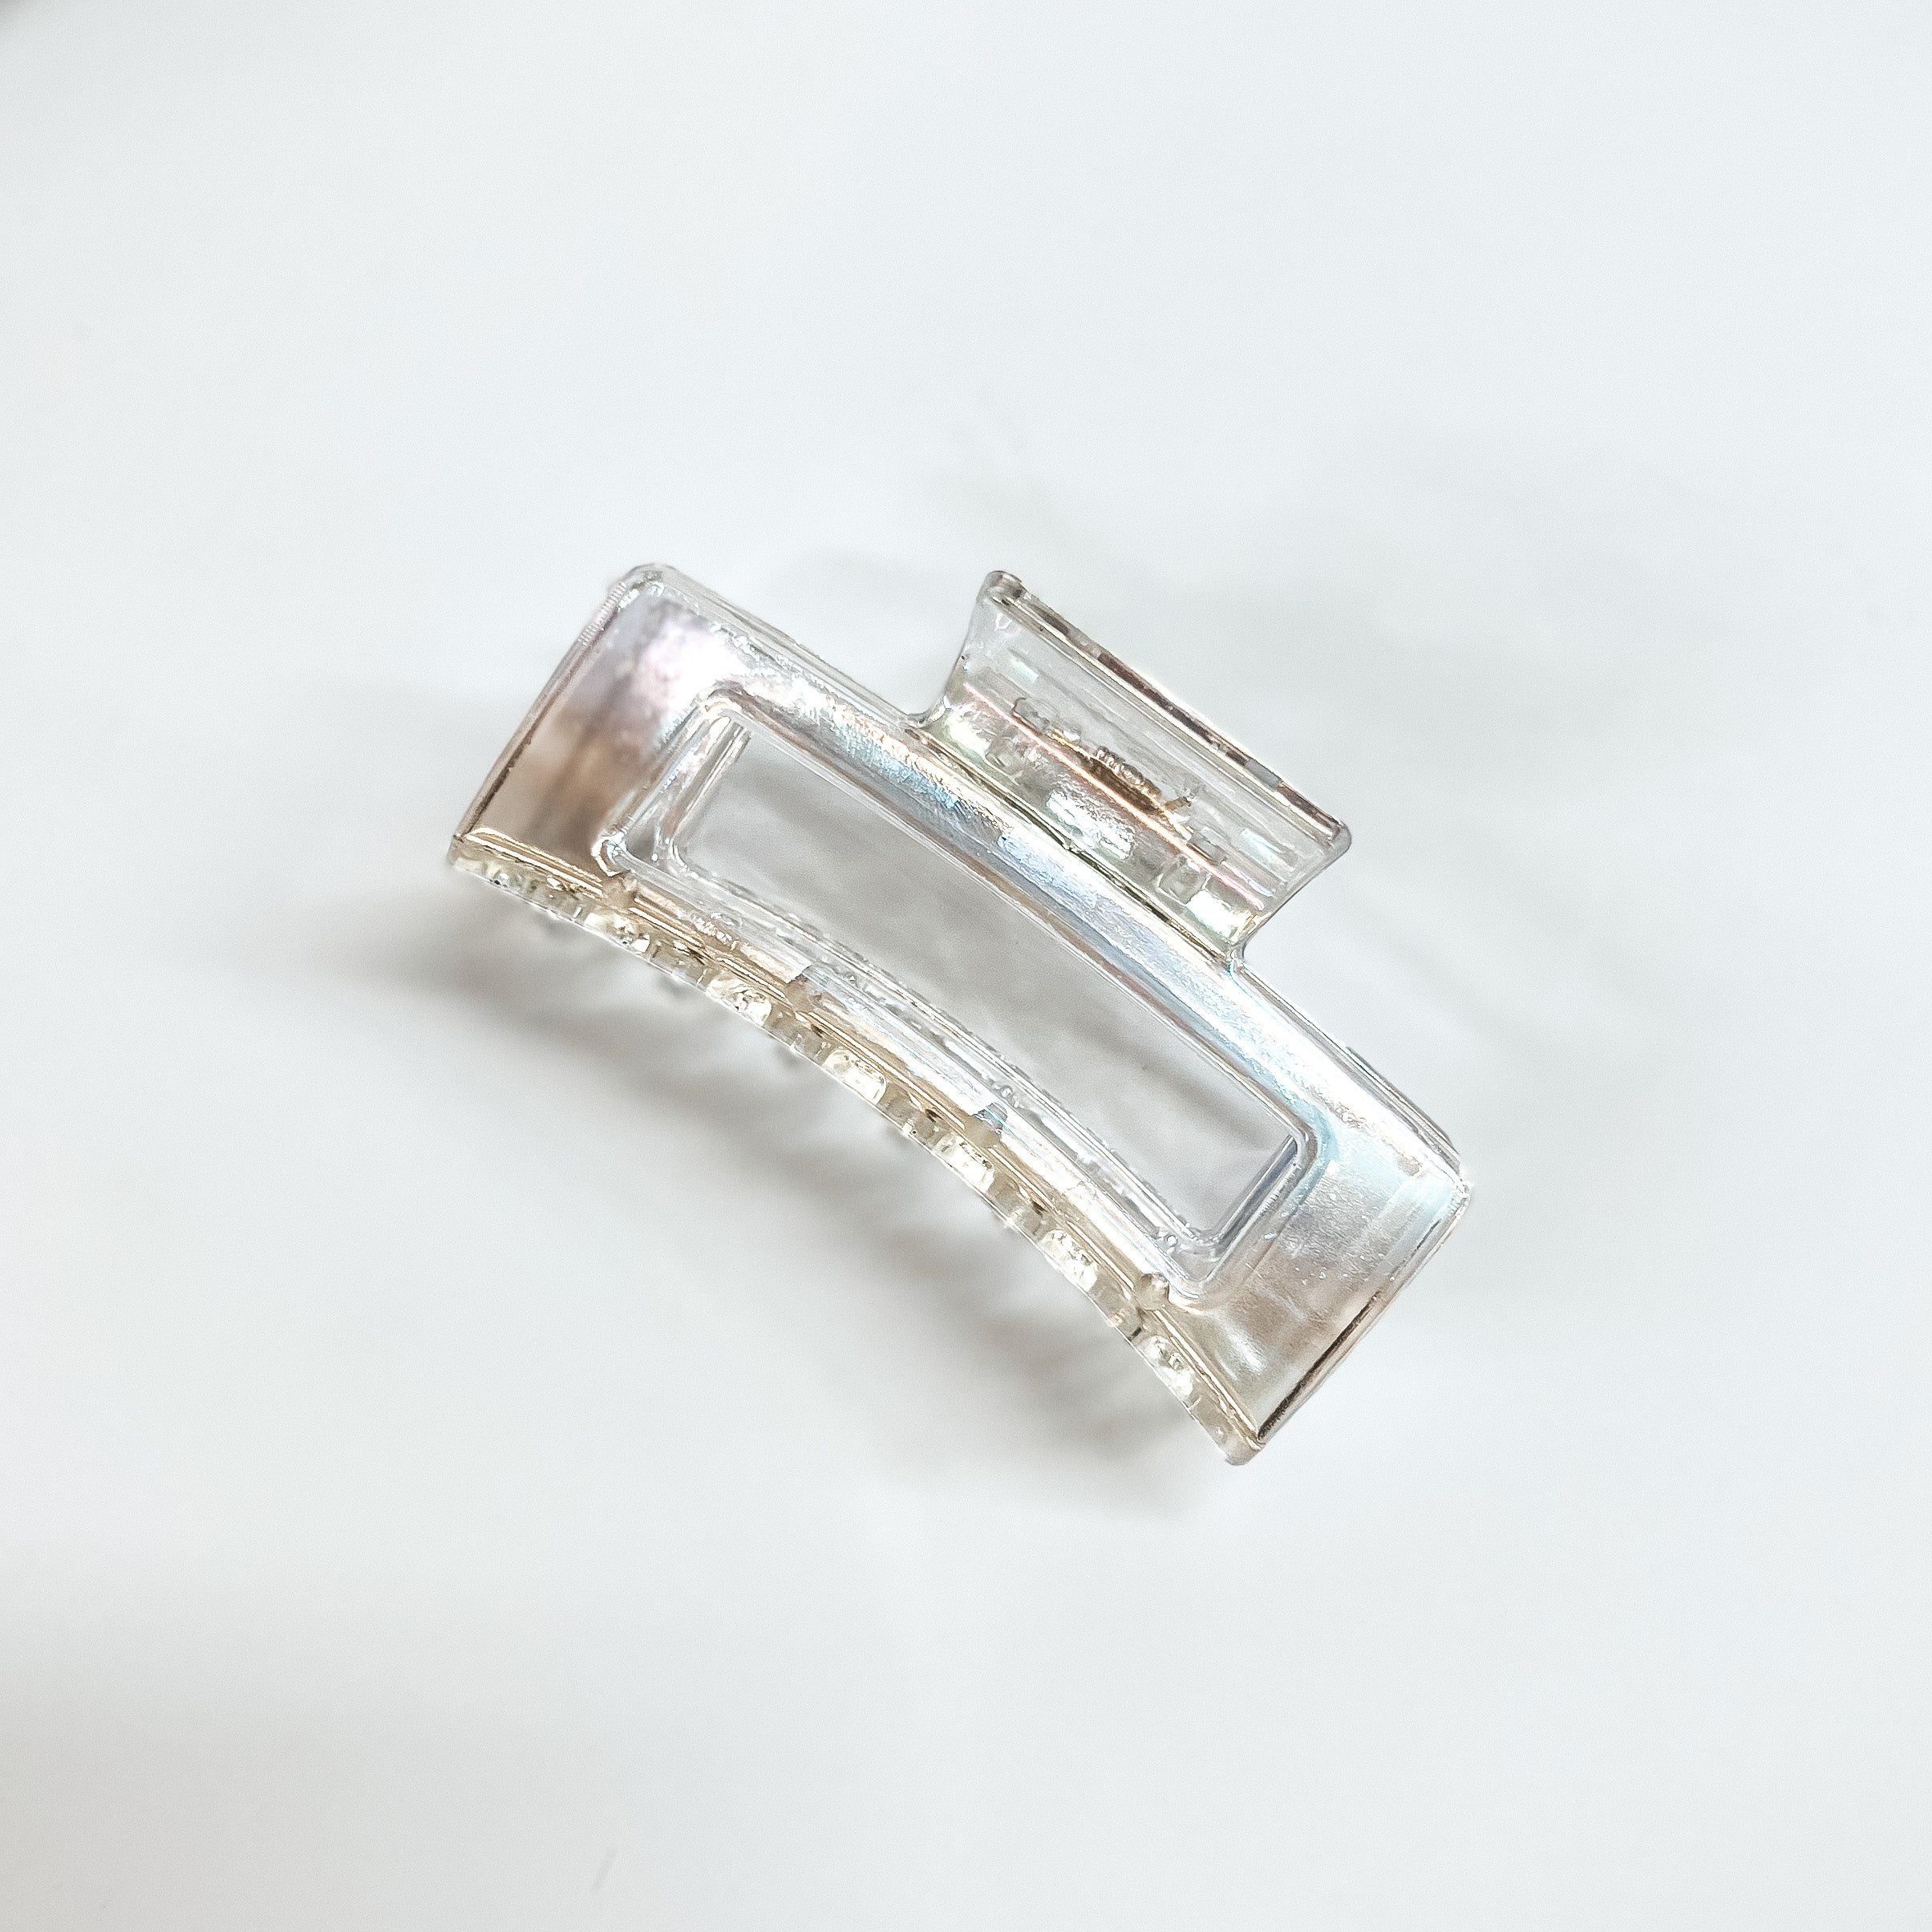 Silver, opaque, rectangle hair clip. This hair clip is pictured on a white background.